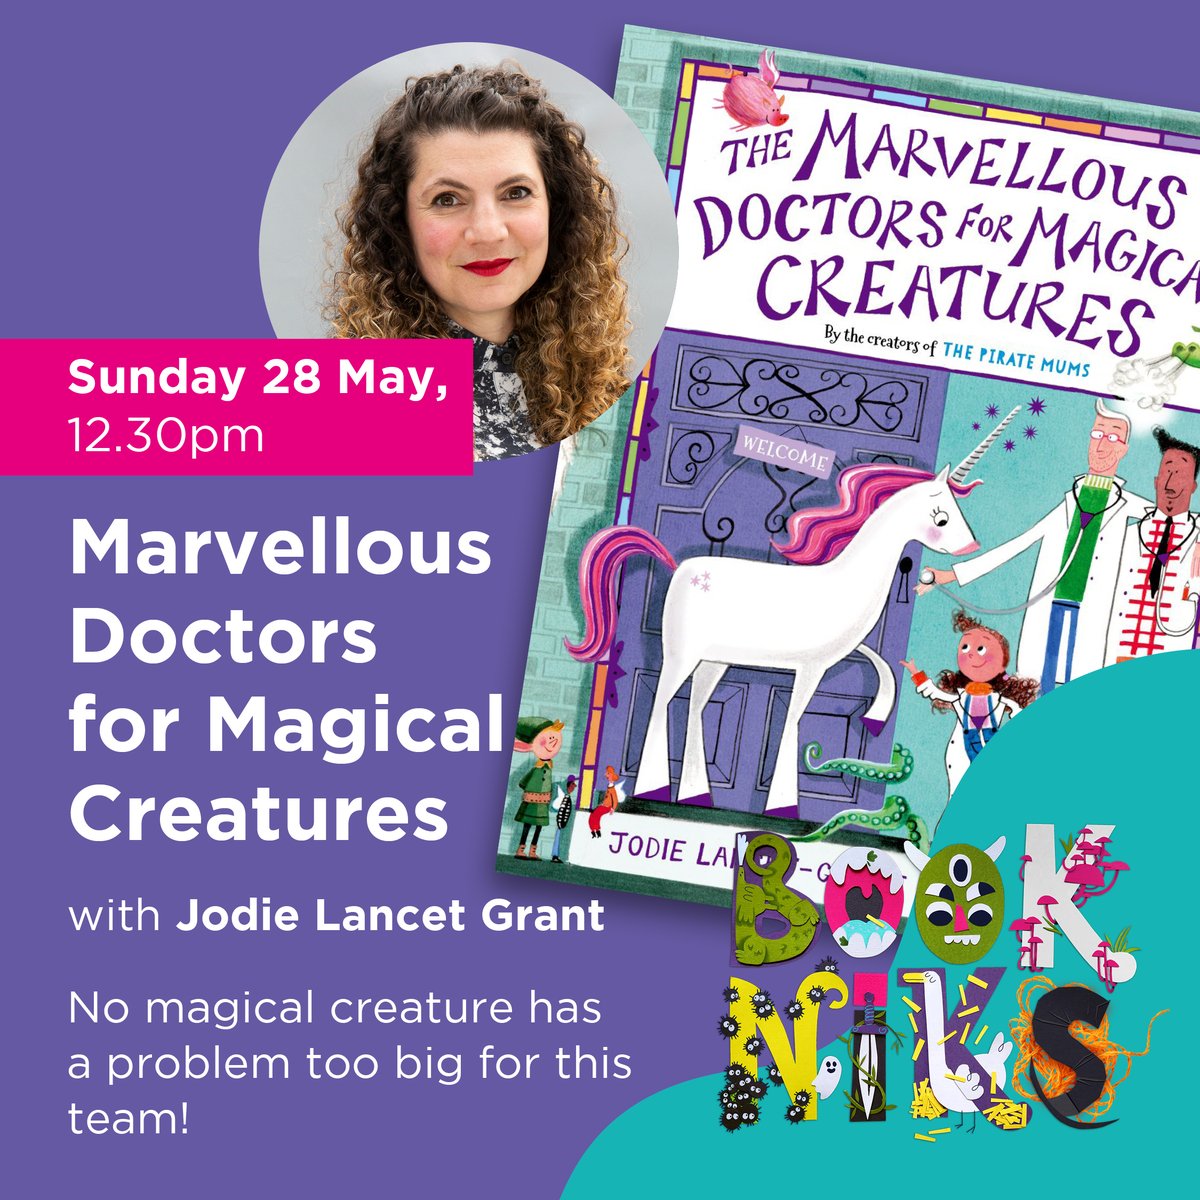 Join author @jlancetgrant at her #Bookniks session featuring #games, interactive #storytelling, a drawing activity, and a chance to find out your #secret #magical creature identity. Tickets: ow.ly/Ao0n50OemaJ